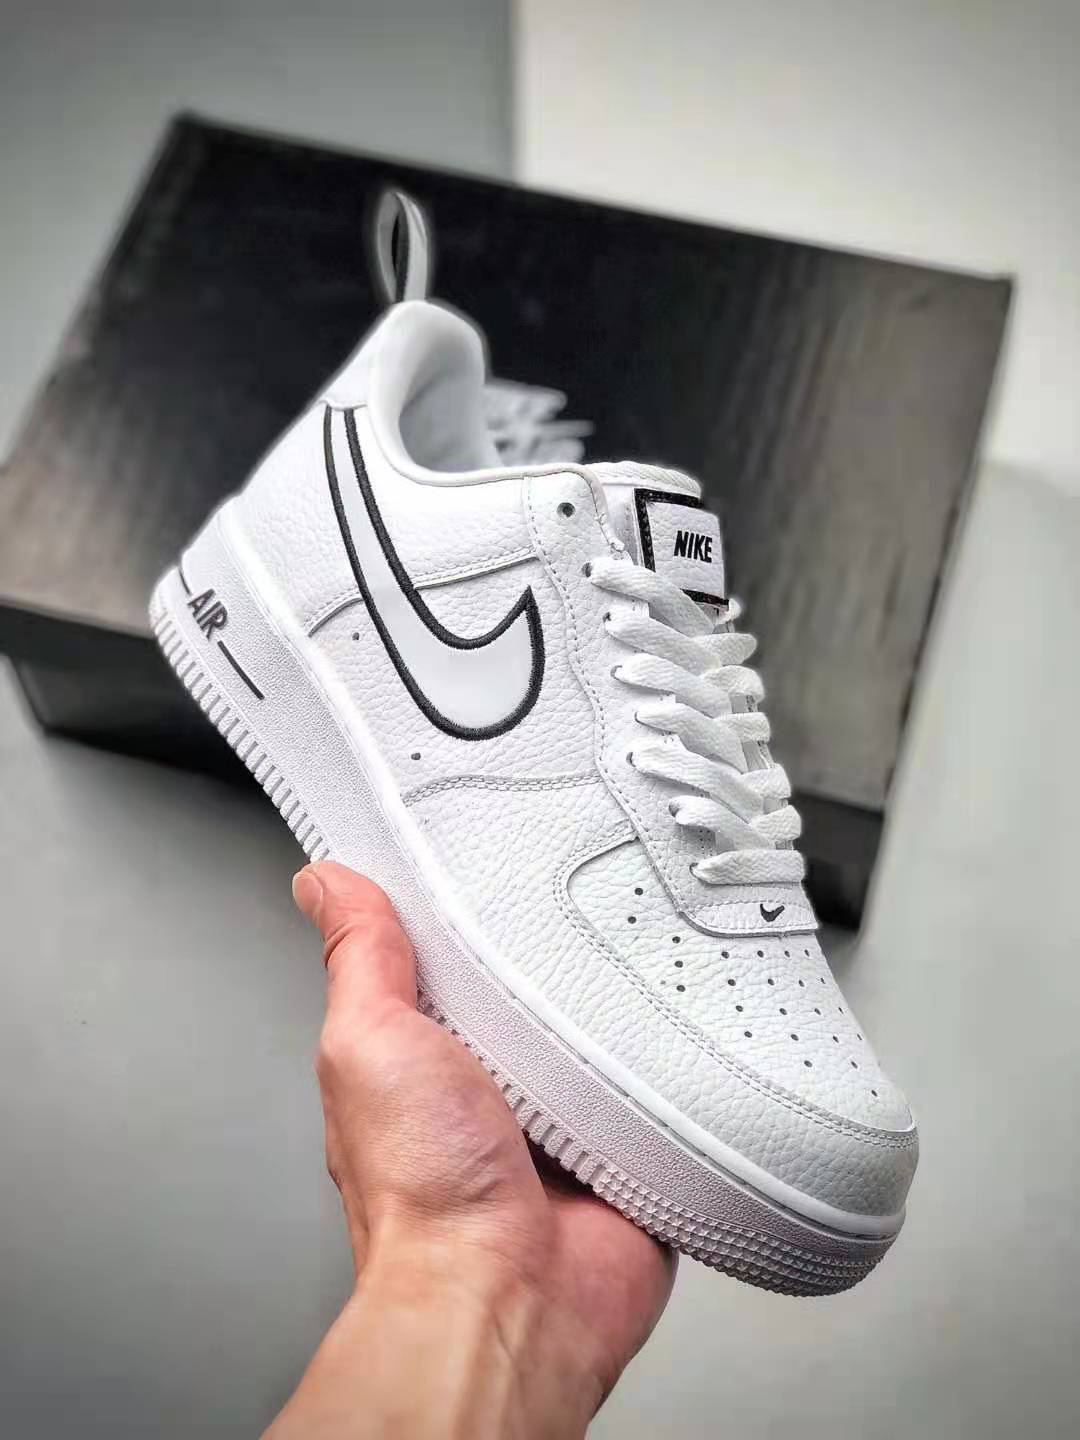 Nike Air Force 1 'White Black' DH2472-100 - Iconic Style and Superior Comfort